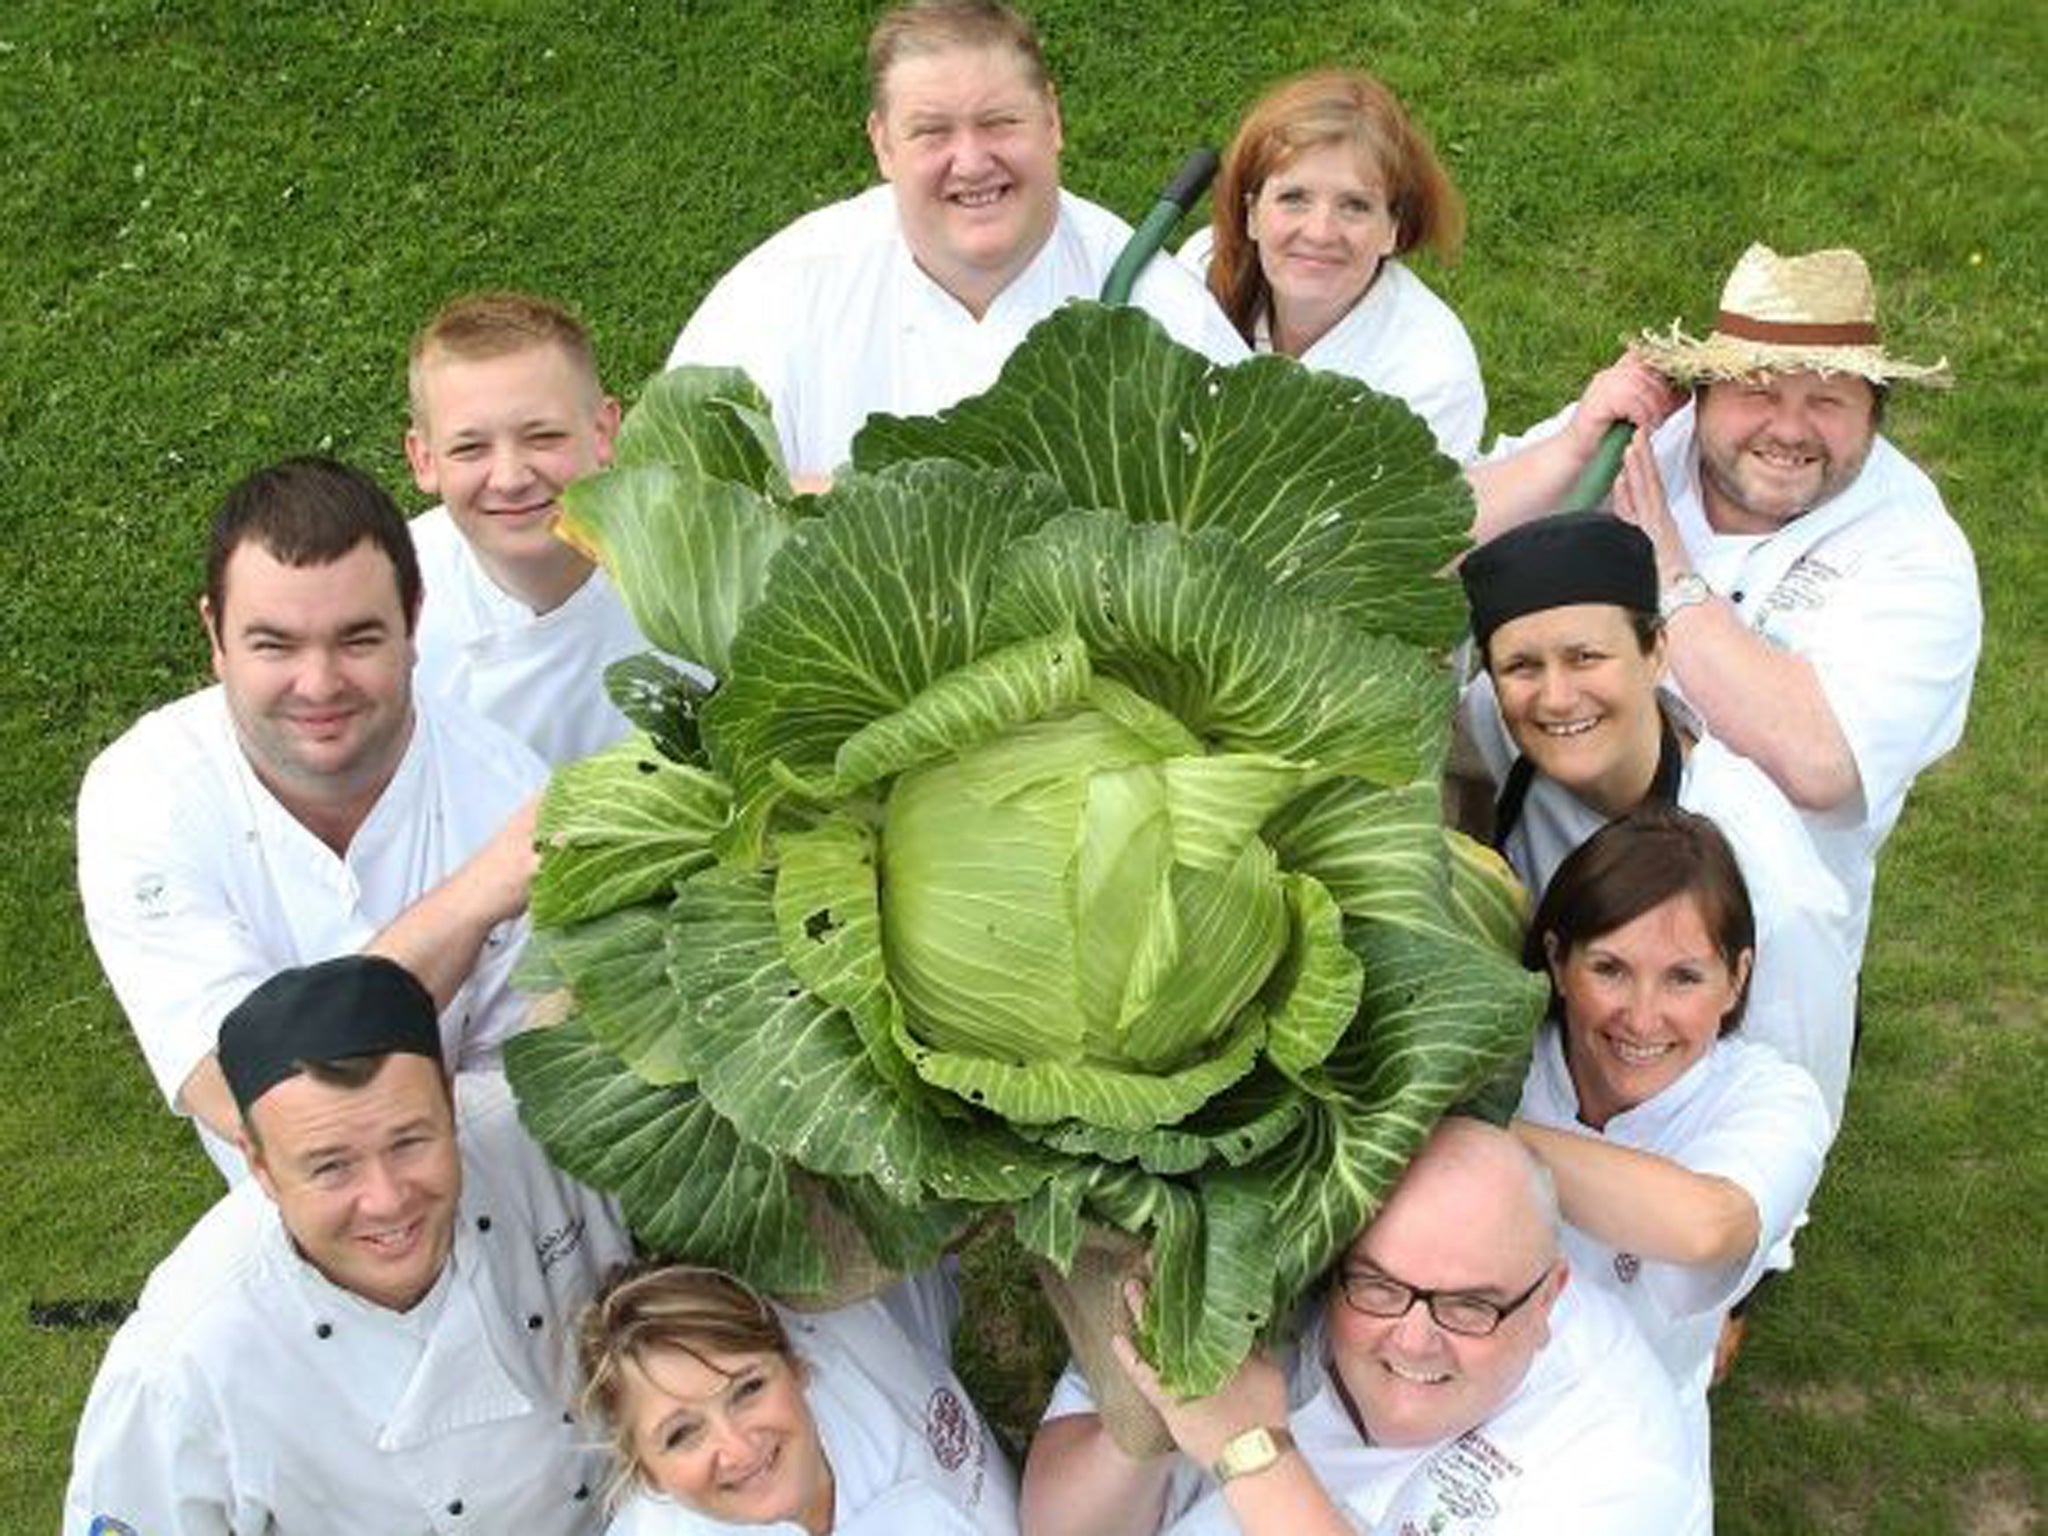 Ten chefs at the Harrogate Autumn Flower Show in North Yorkshire launched their bid to set a world record to cook the most dishes in one day from one single giant cabbage